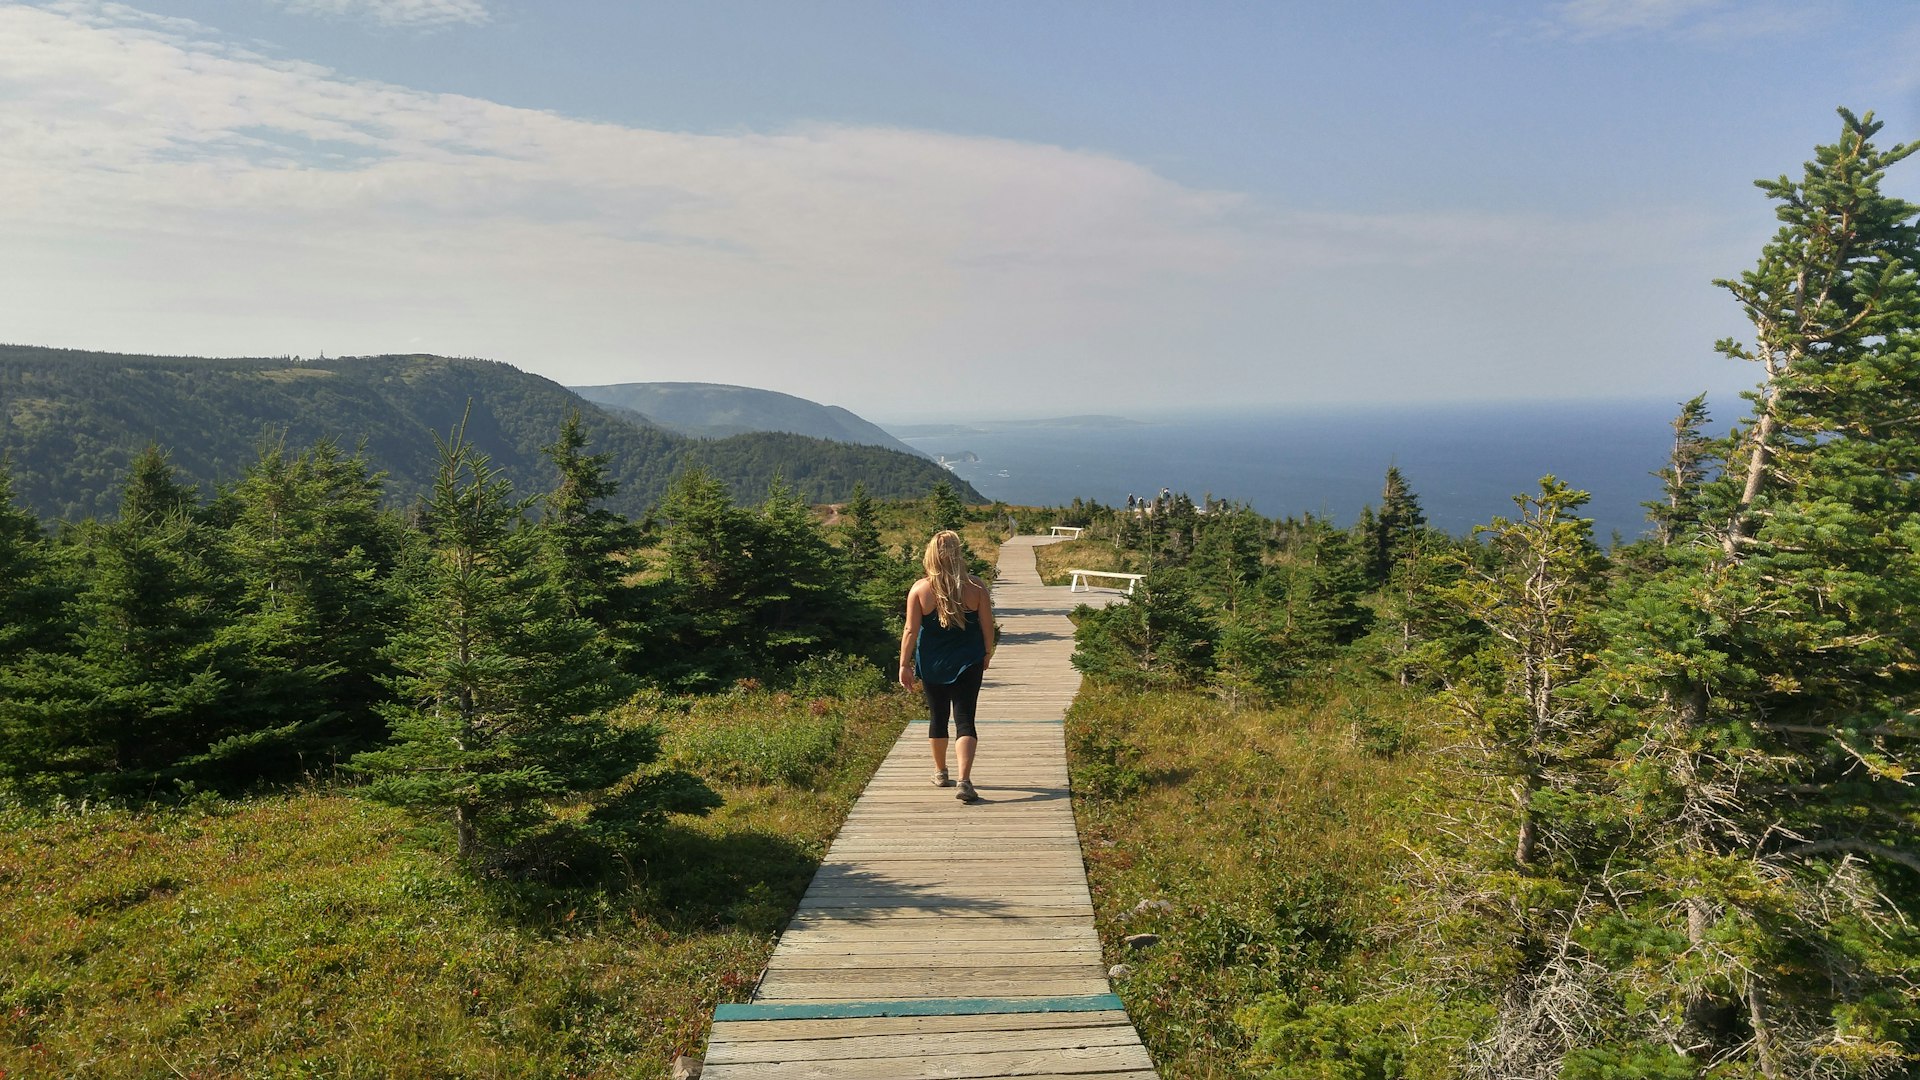 The back of a hiker as they walk down a wooden boardwalk on a clifftop hiking trail